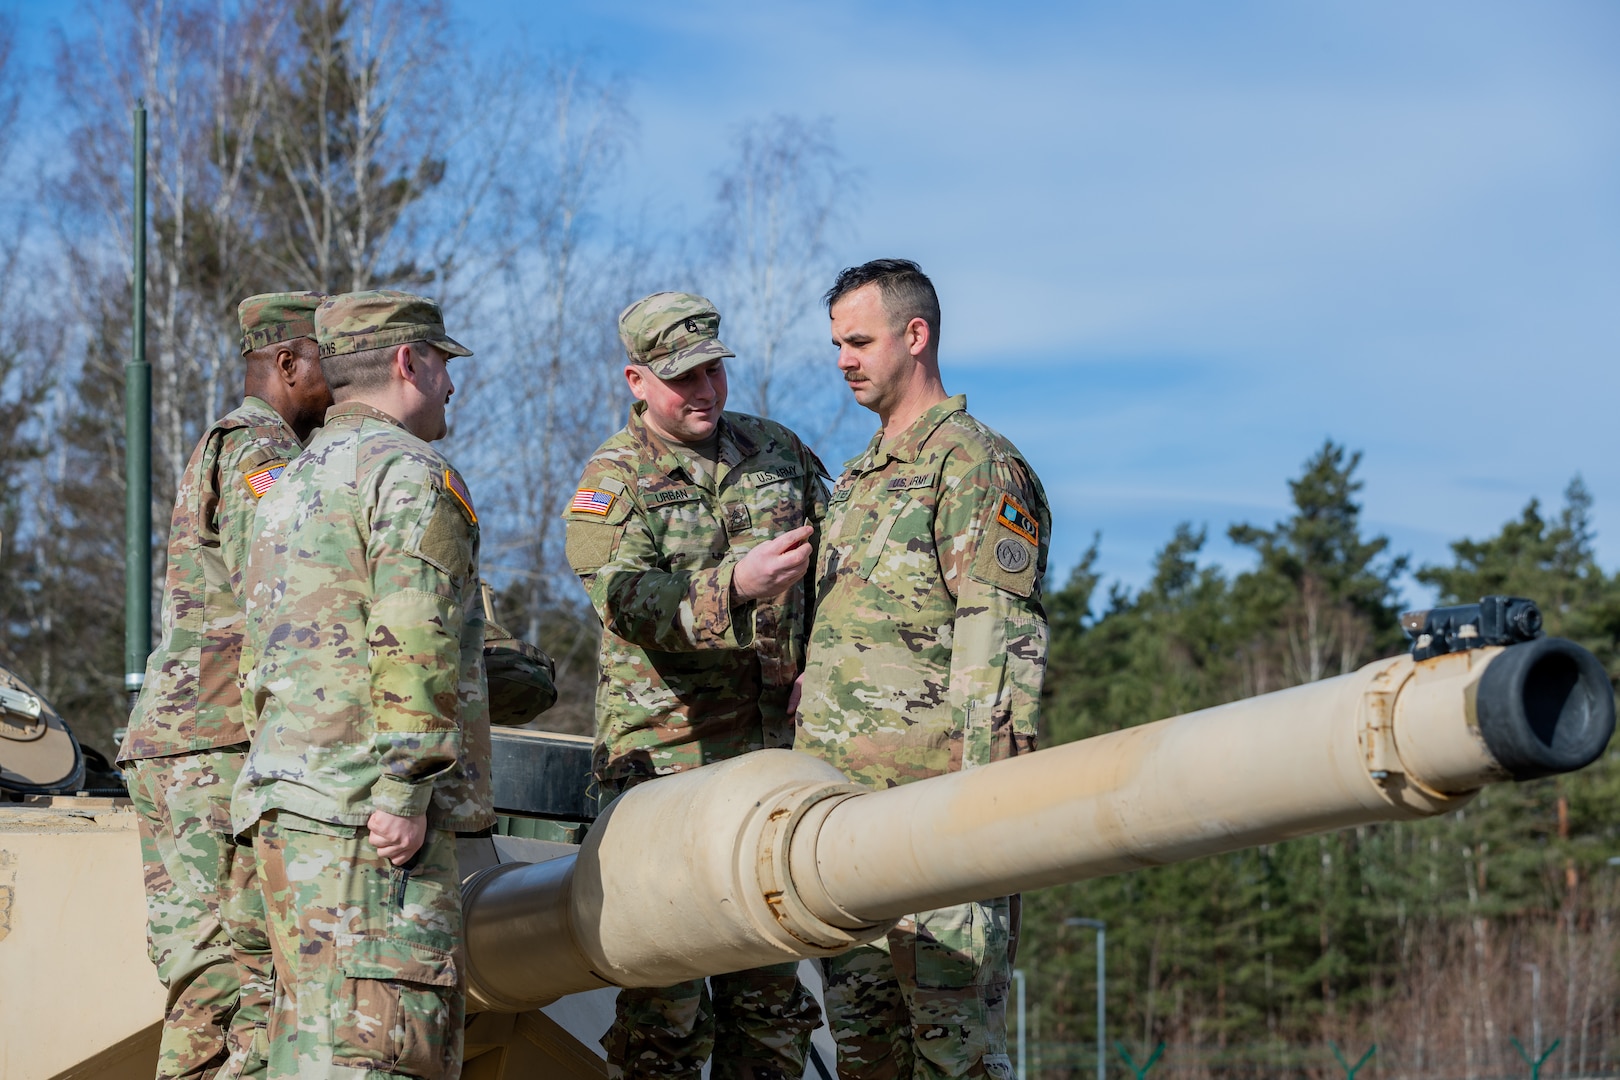 U.S. Army Staff Sgt. Angelo E. Gelster, an ammunition specialist assigned to Task Force Orion, 27th Infantry Brigade Combat Team, New York Army National Guard, is promoted during a ceremony atop an M1A2 Abrams tank in Grafenwoehr, Germany, Feb. 20, 2023. Gelster, a former armor crewmember who operated M1A1 Abrams tanks with the now-disbanded 127th Armor Regiment, is deployed to Germany in support of the Joint Multinational Training Group – Ukraine mission to ensure the combat effectiveness of Ukrainian military personnel training in Germany.